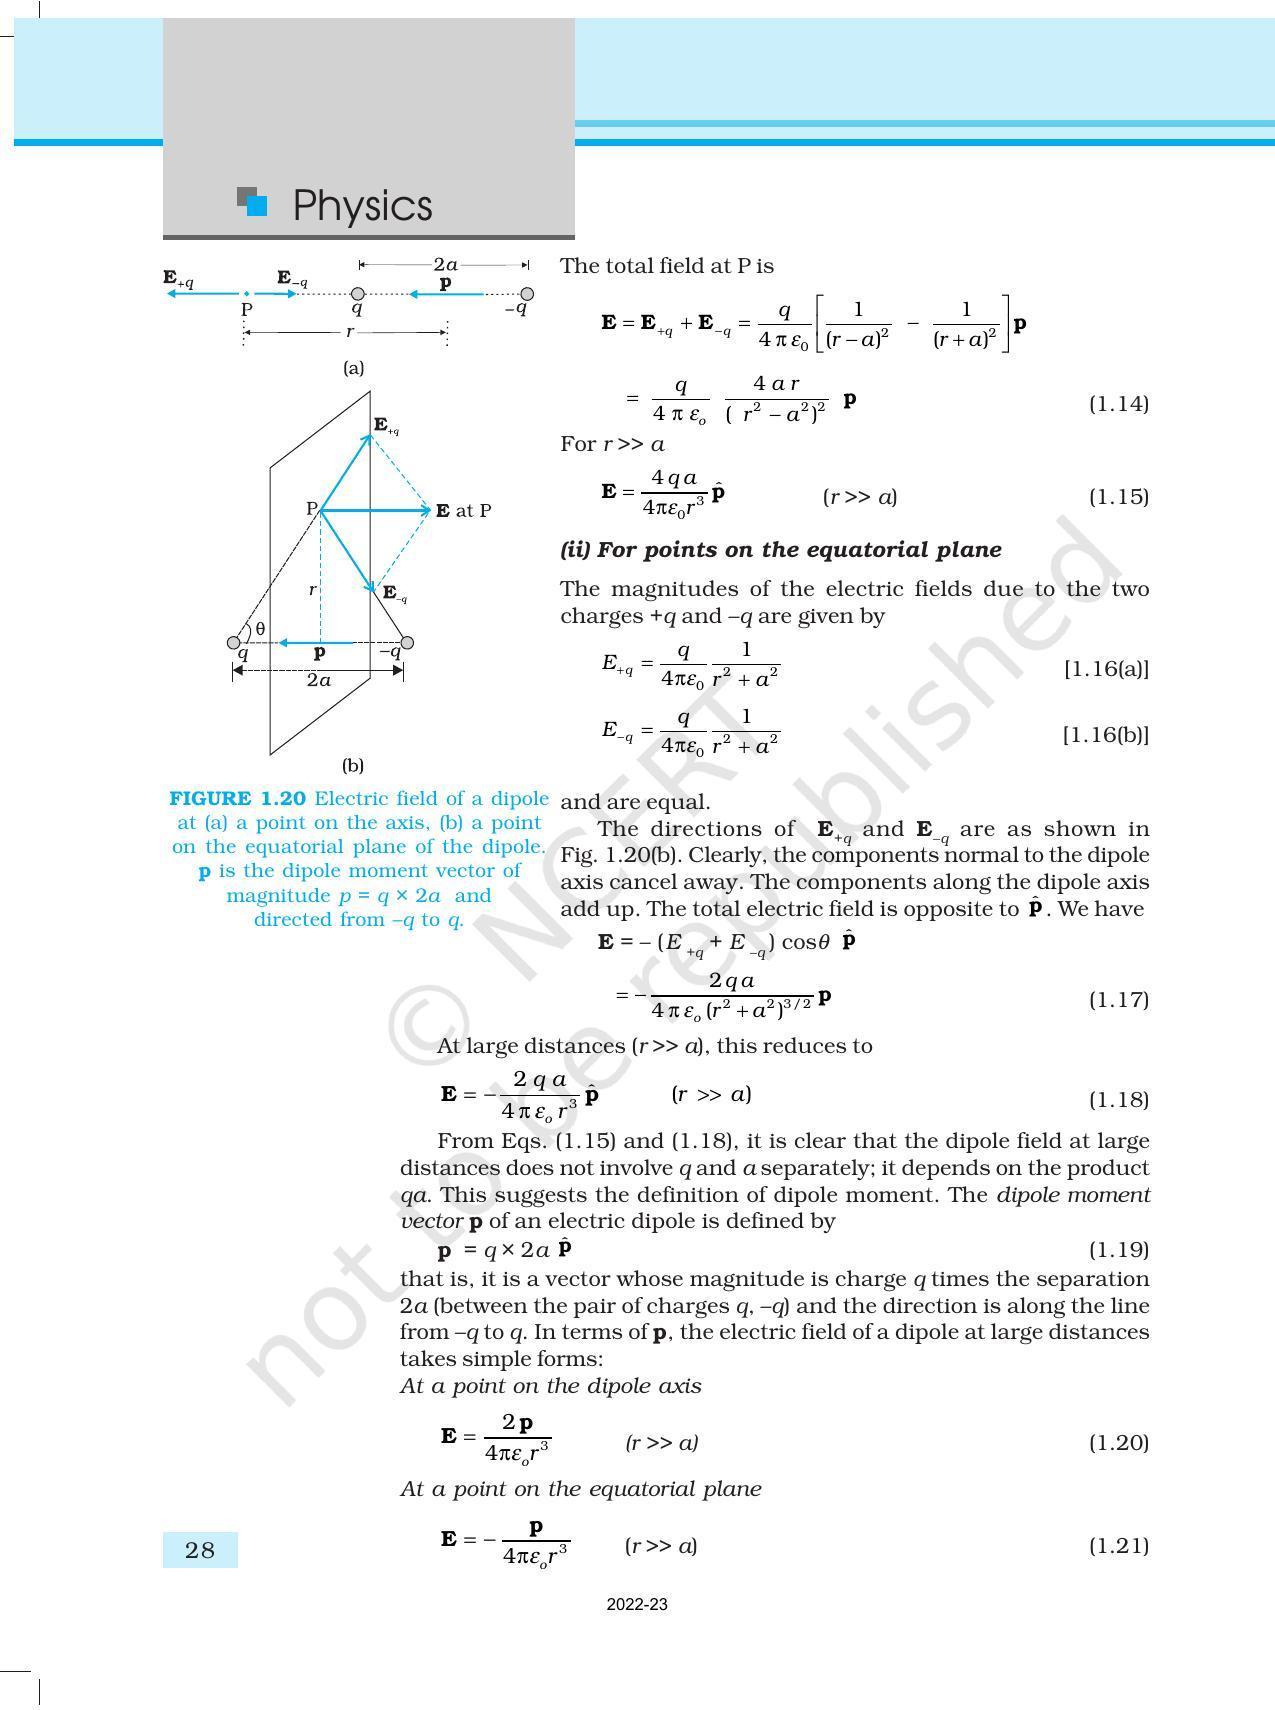 NCERT Book for Class 12 Physics Chapter 1 Electric Charges and Fields - Page 28